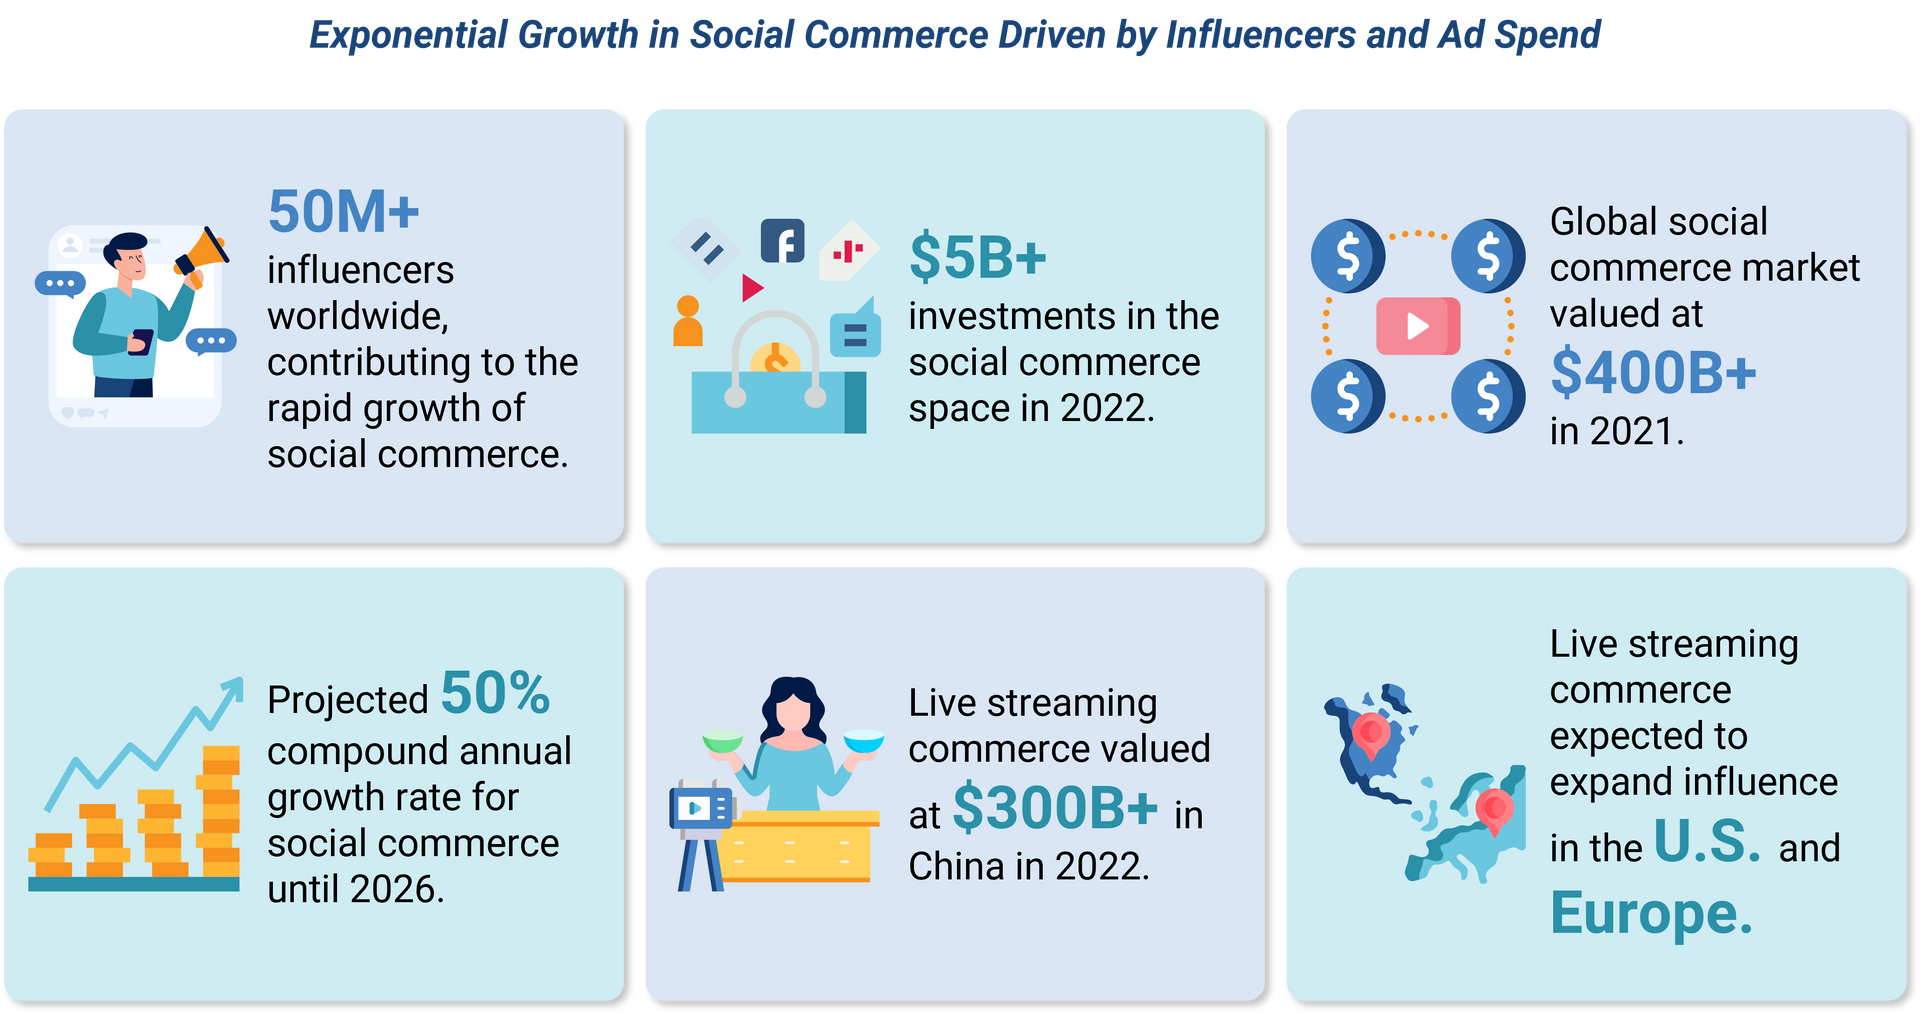 An infographic visualizing the exponential growth in social commerce driven by influencers and ad spend.